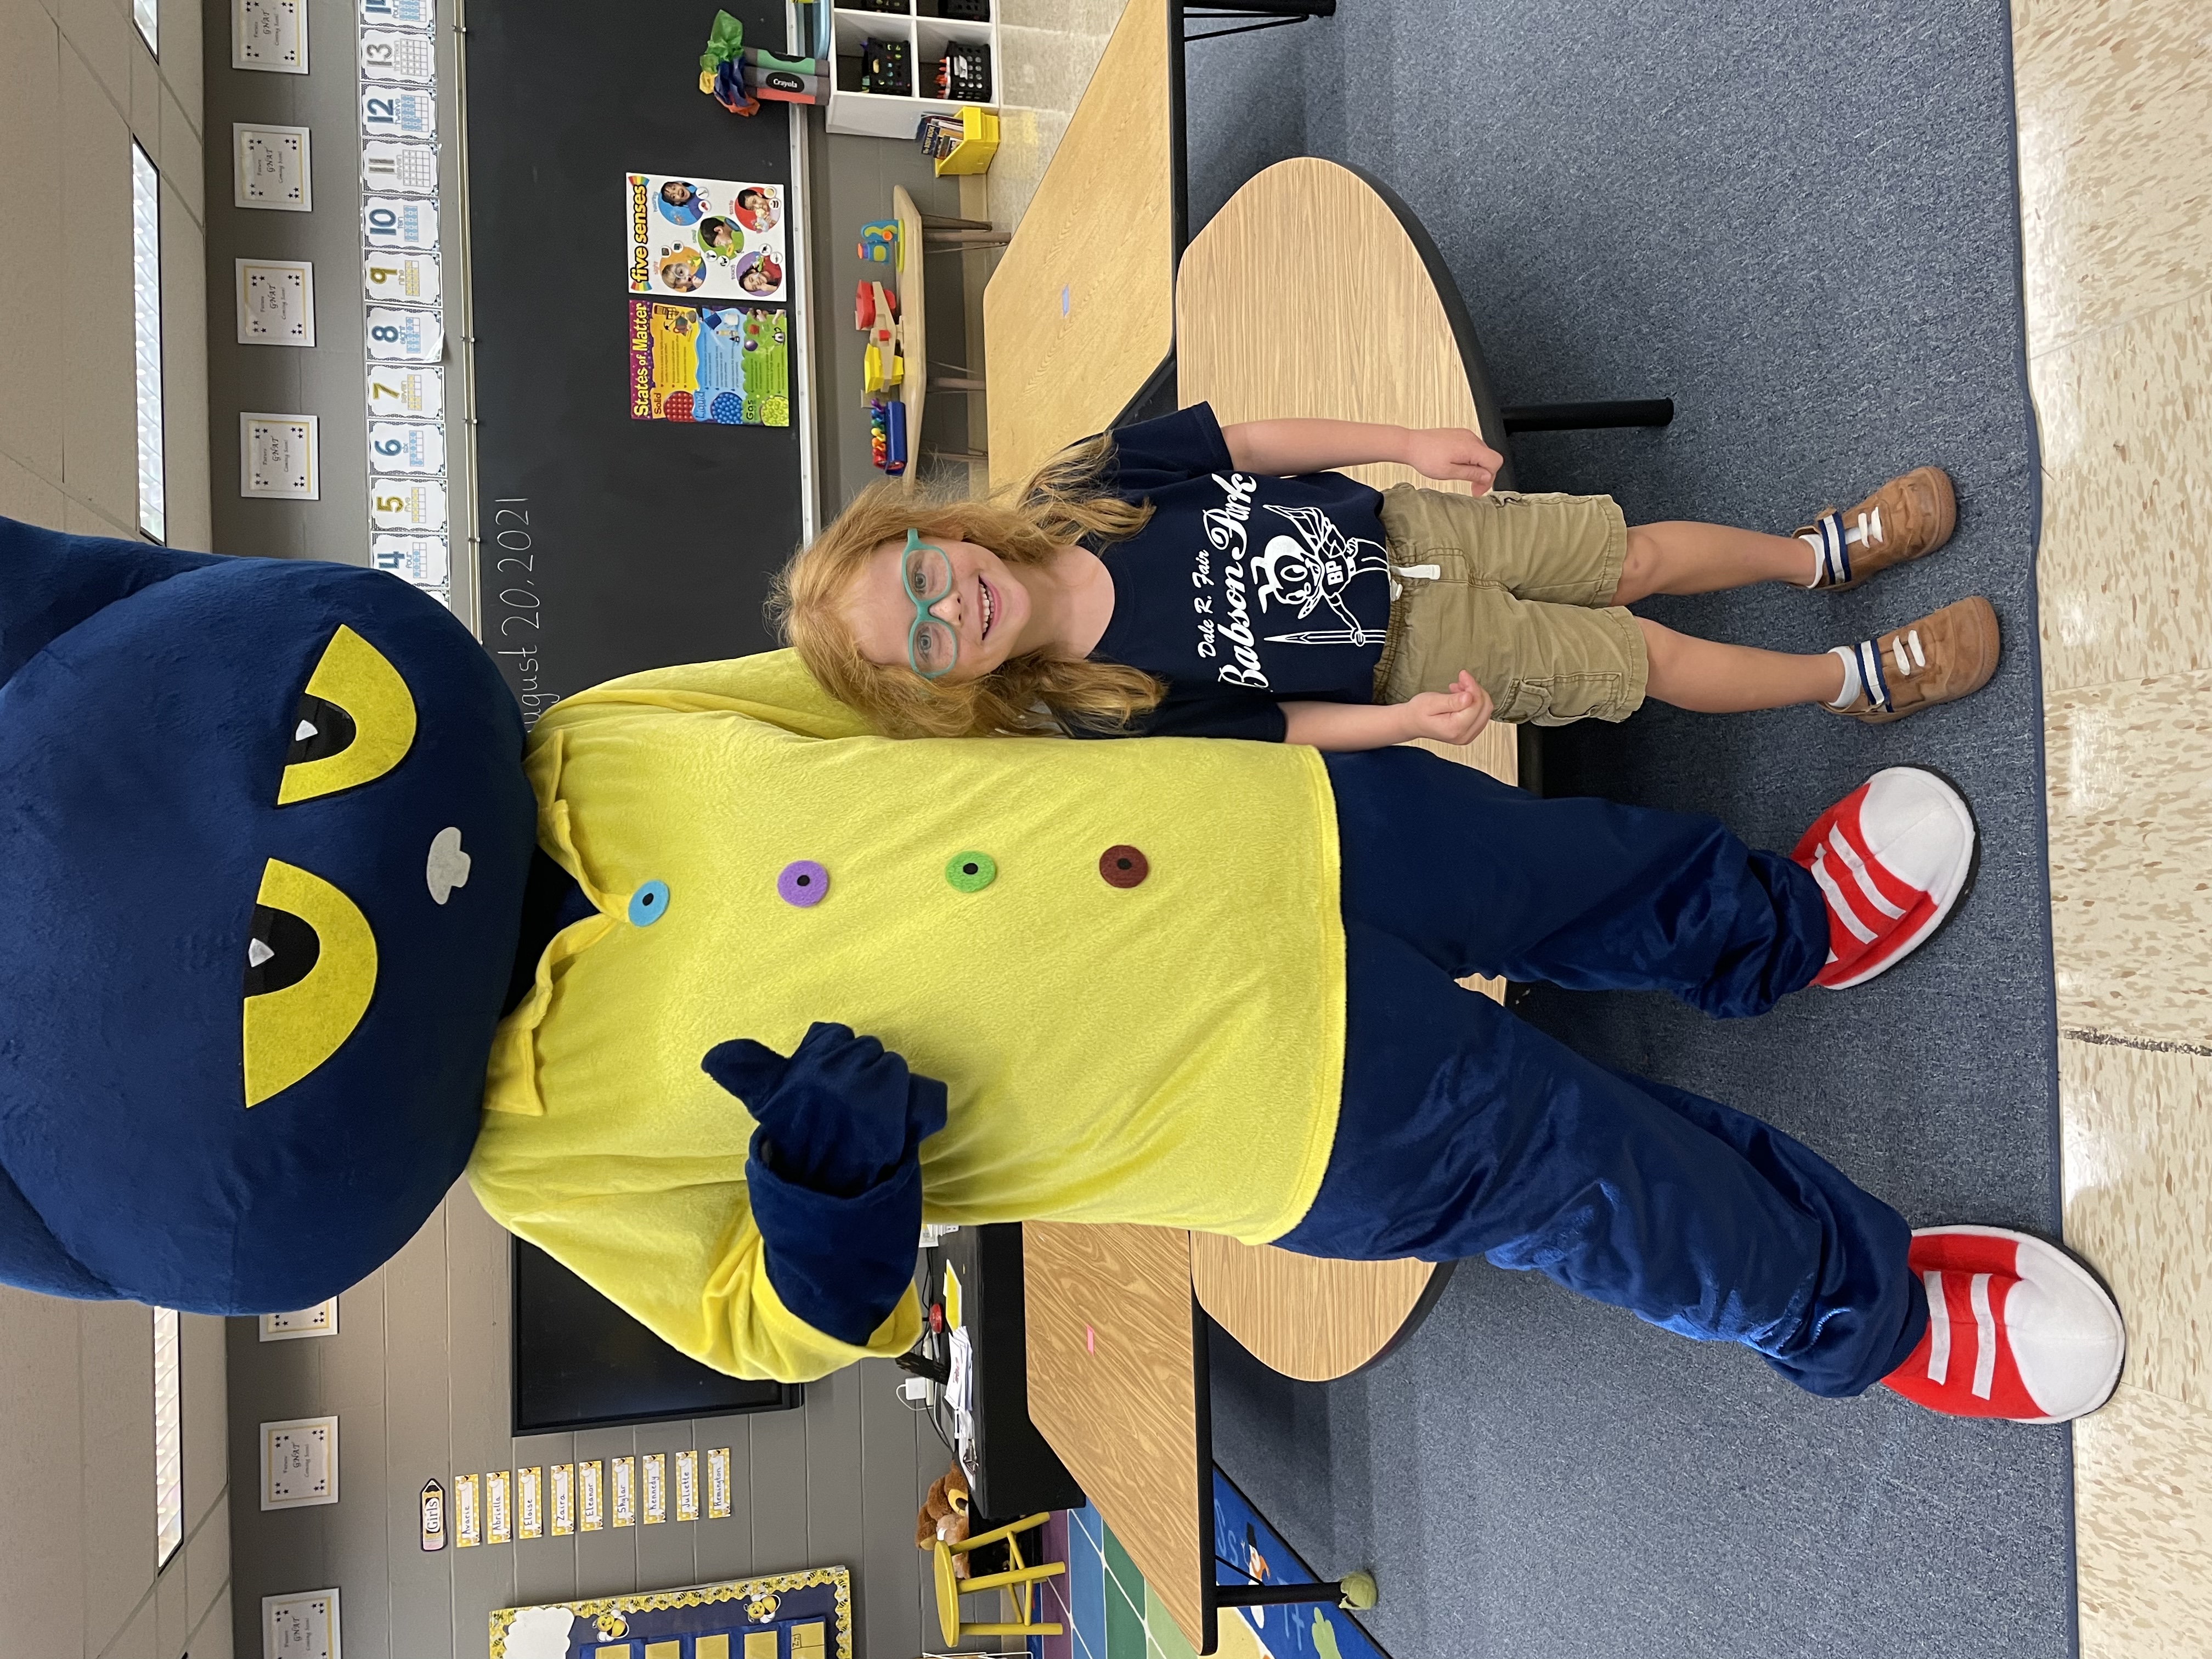 Pete the Cat visiting with a Kindergarten Gnat.